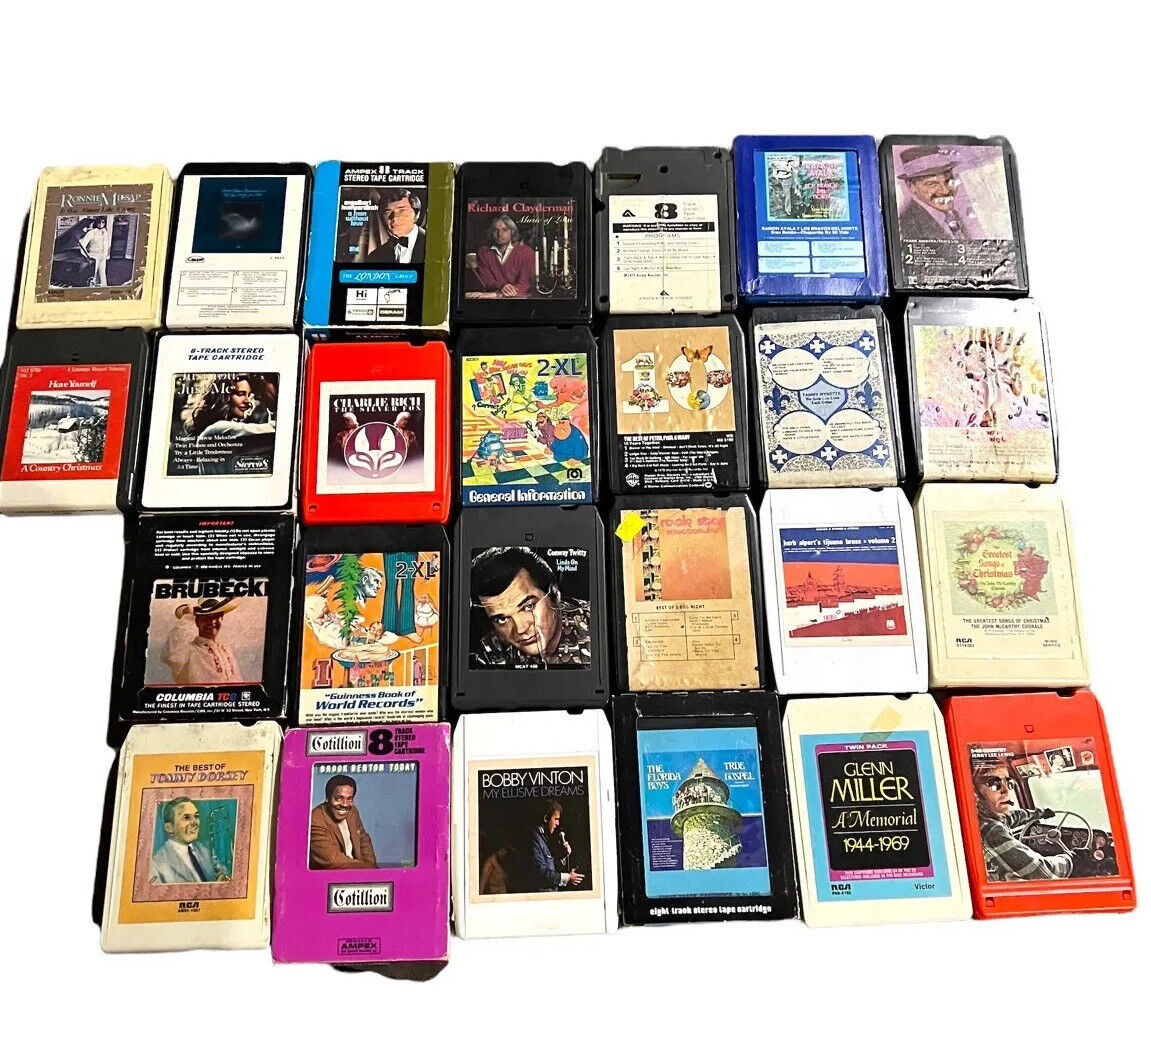 8-TRACK TAPES LOT OF 26 VARIOUS VINTAGE RETRO ARTISTS CONWAY TWITTY GLENN MILLER